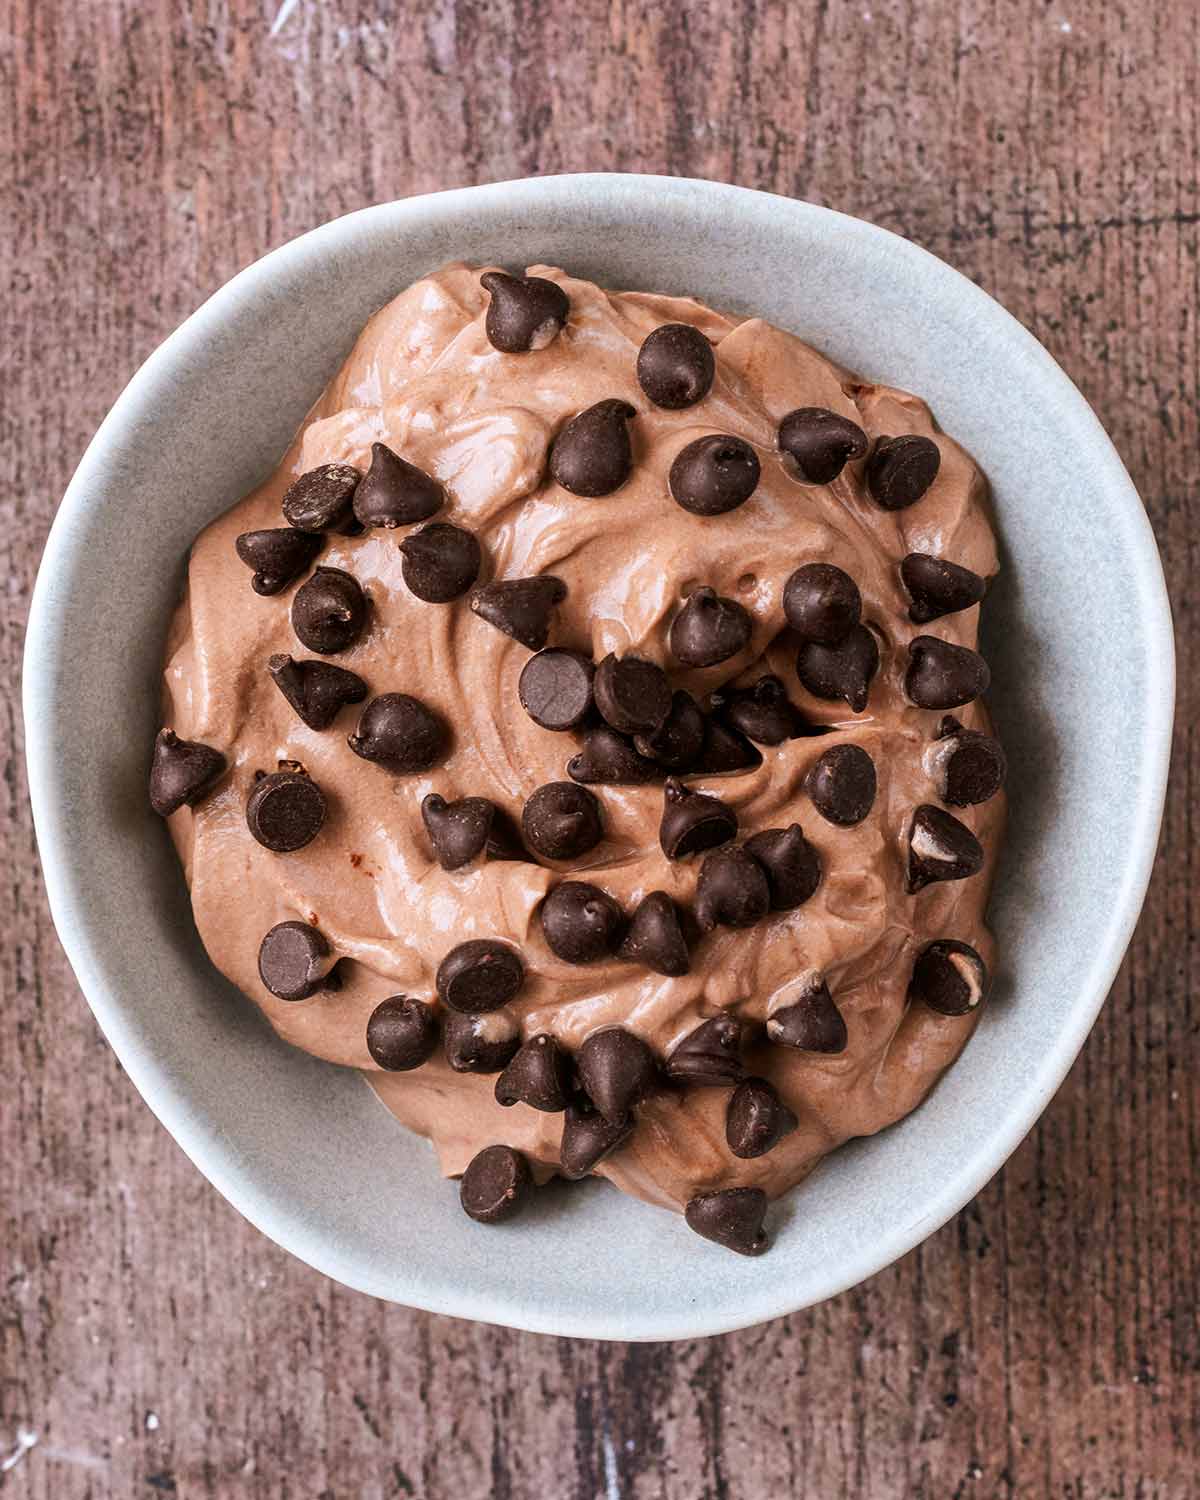 A serving bowl with chocolate yogurt topped with chocolate chips.